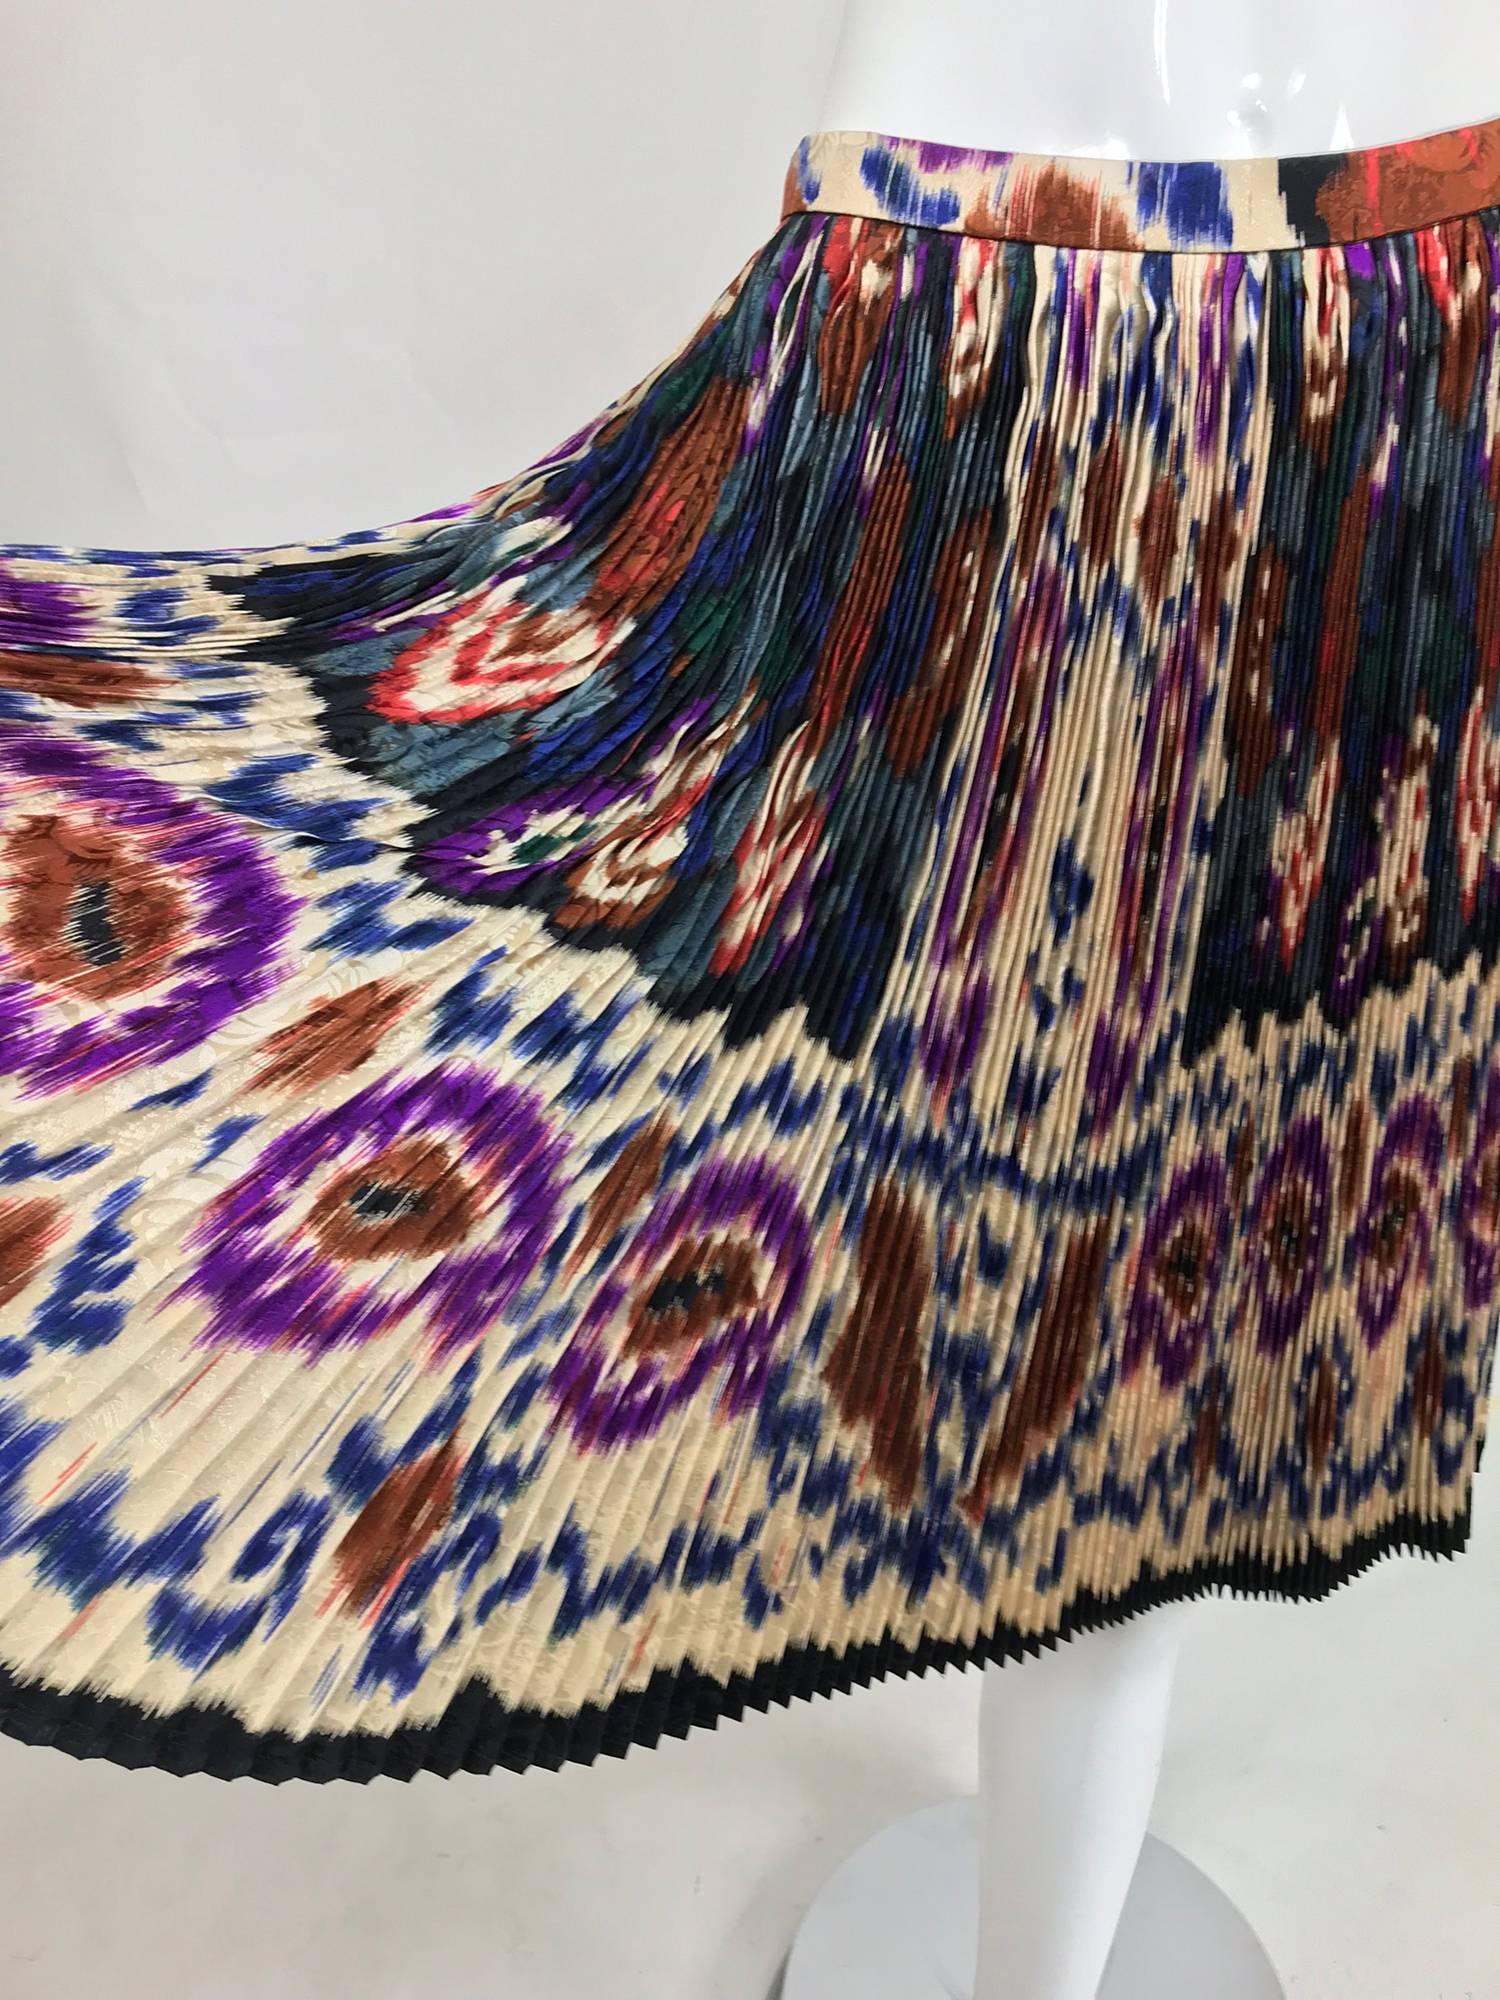 Vintage Ungaro rich colour silk jacquard ikat print knife pleated skirt and coordinating top from the 1980s...The top has a high pleated neck, closes at the side front with black faceted glass buttons to the waist...The sleeves are gathered at the